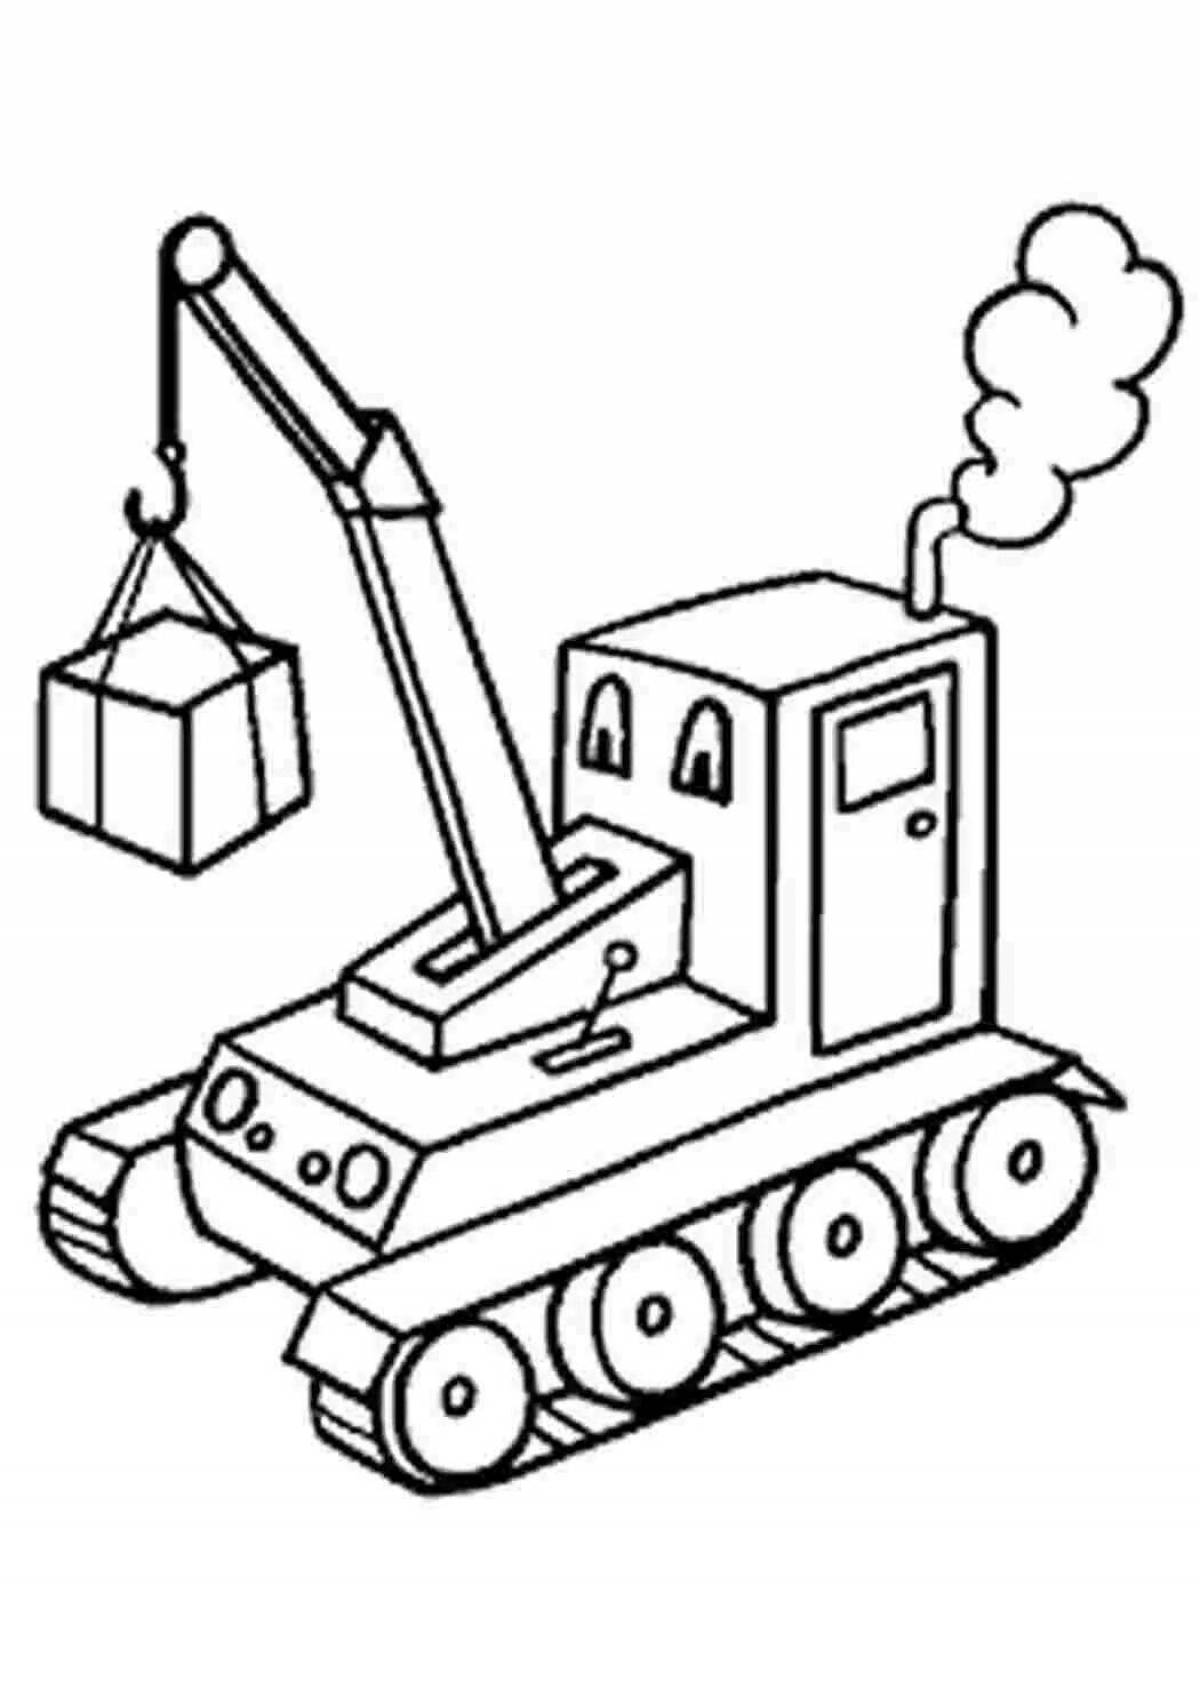 Magnificent Crane Coloring Page for 5-6 year olds